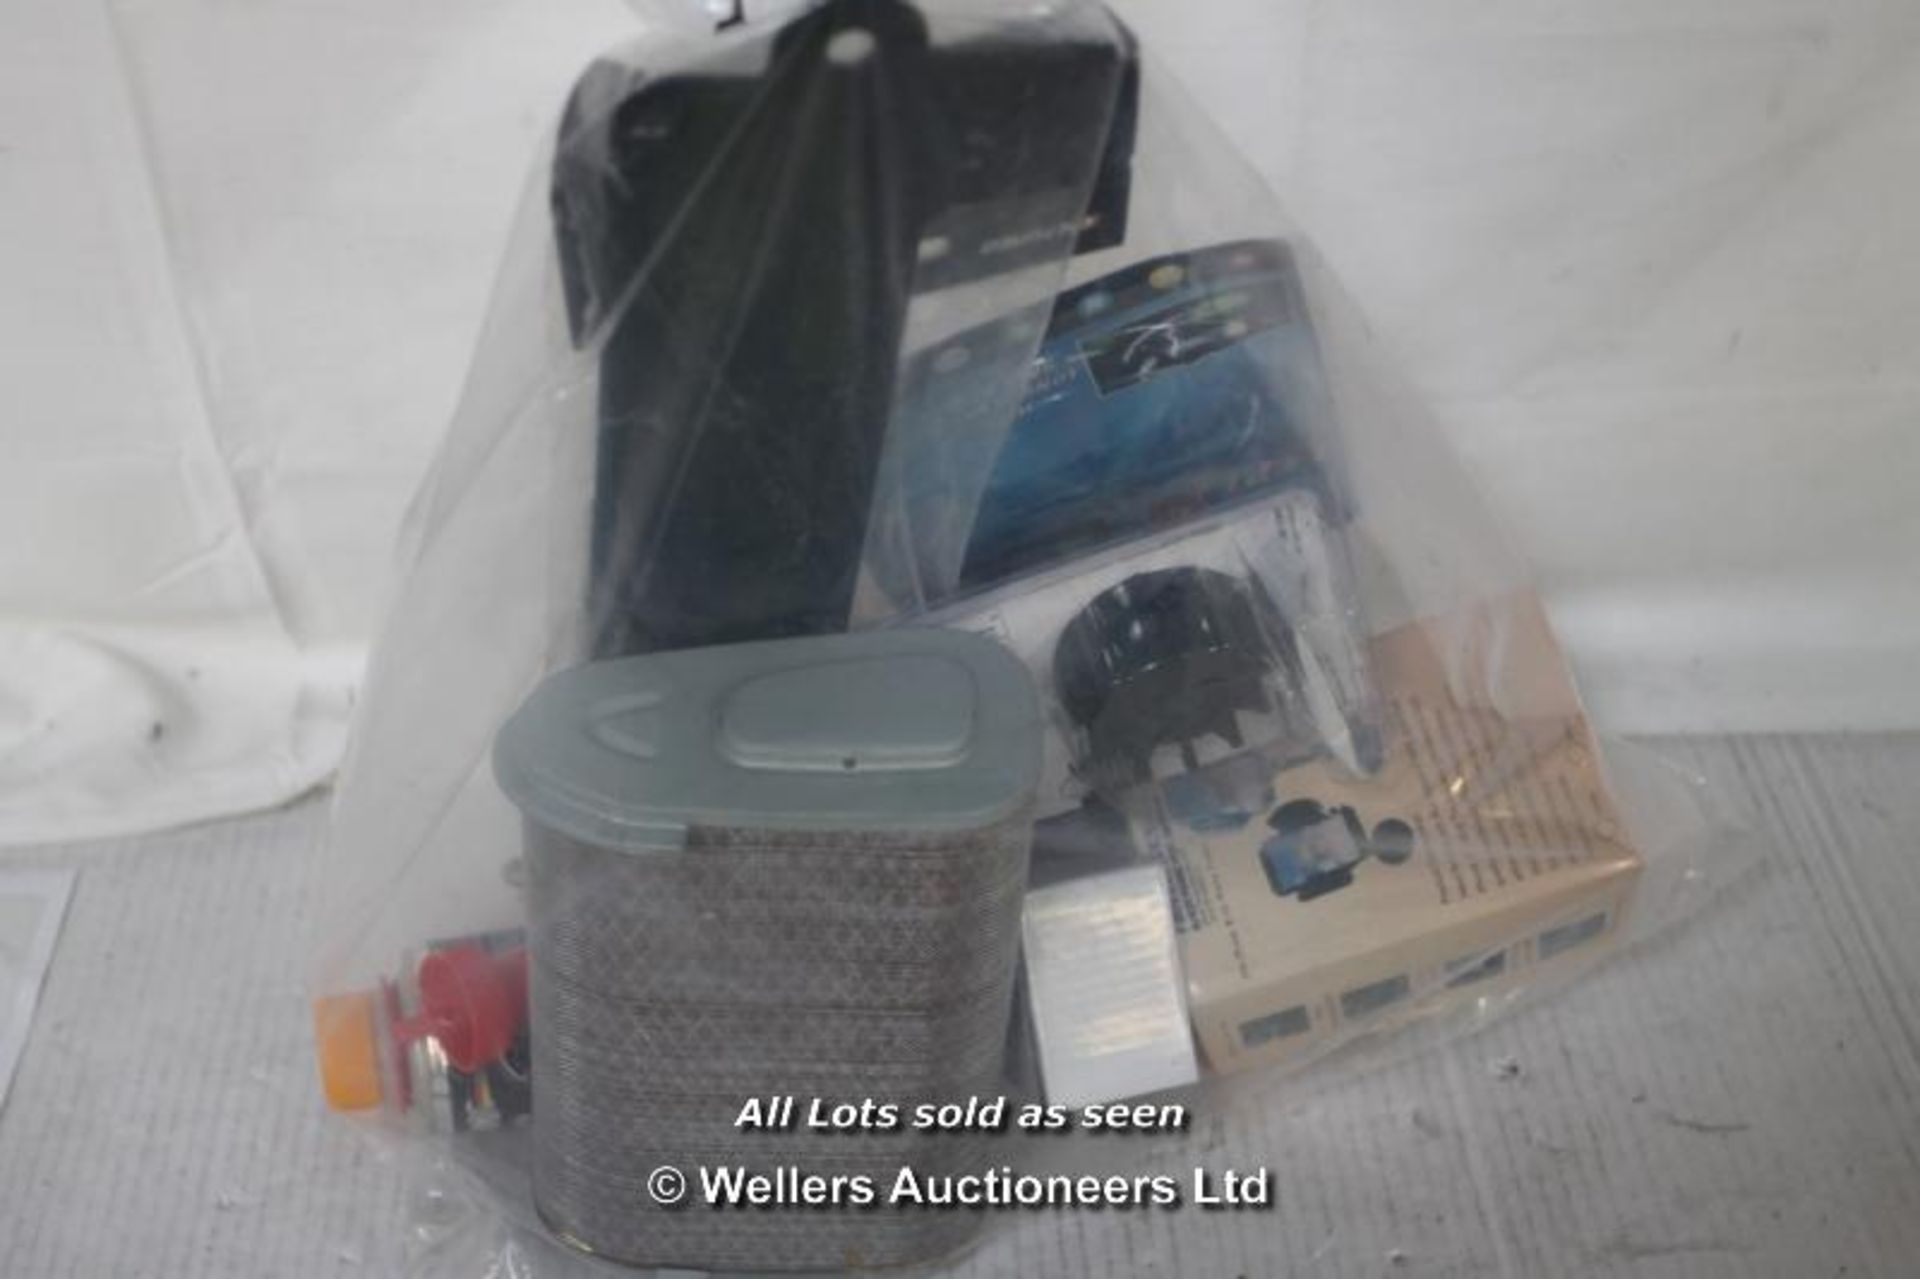 BAG OF 8 MIXED CAR ACCESSORIES INC. LIGHTS, PHONE HOLDER, AIR FILTER, POWDER CLEAN, COIL PACK - Image 2 of 2